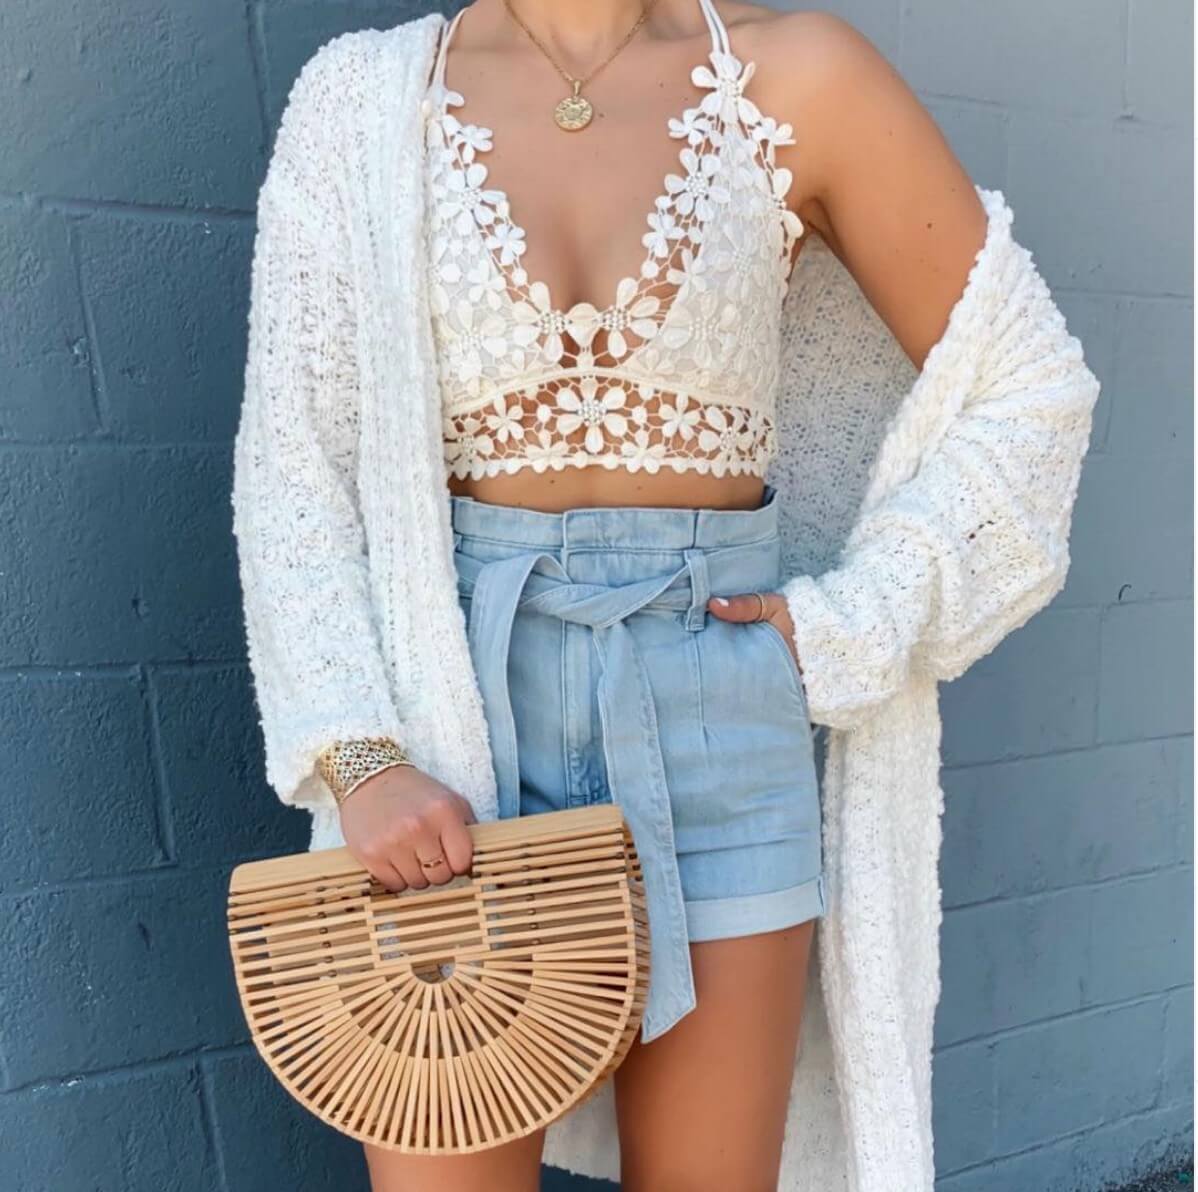 How To Wear a Bralette: 34 Awesome Outfit Ideas 22